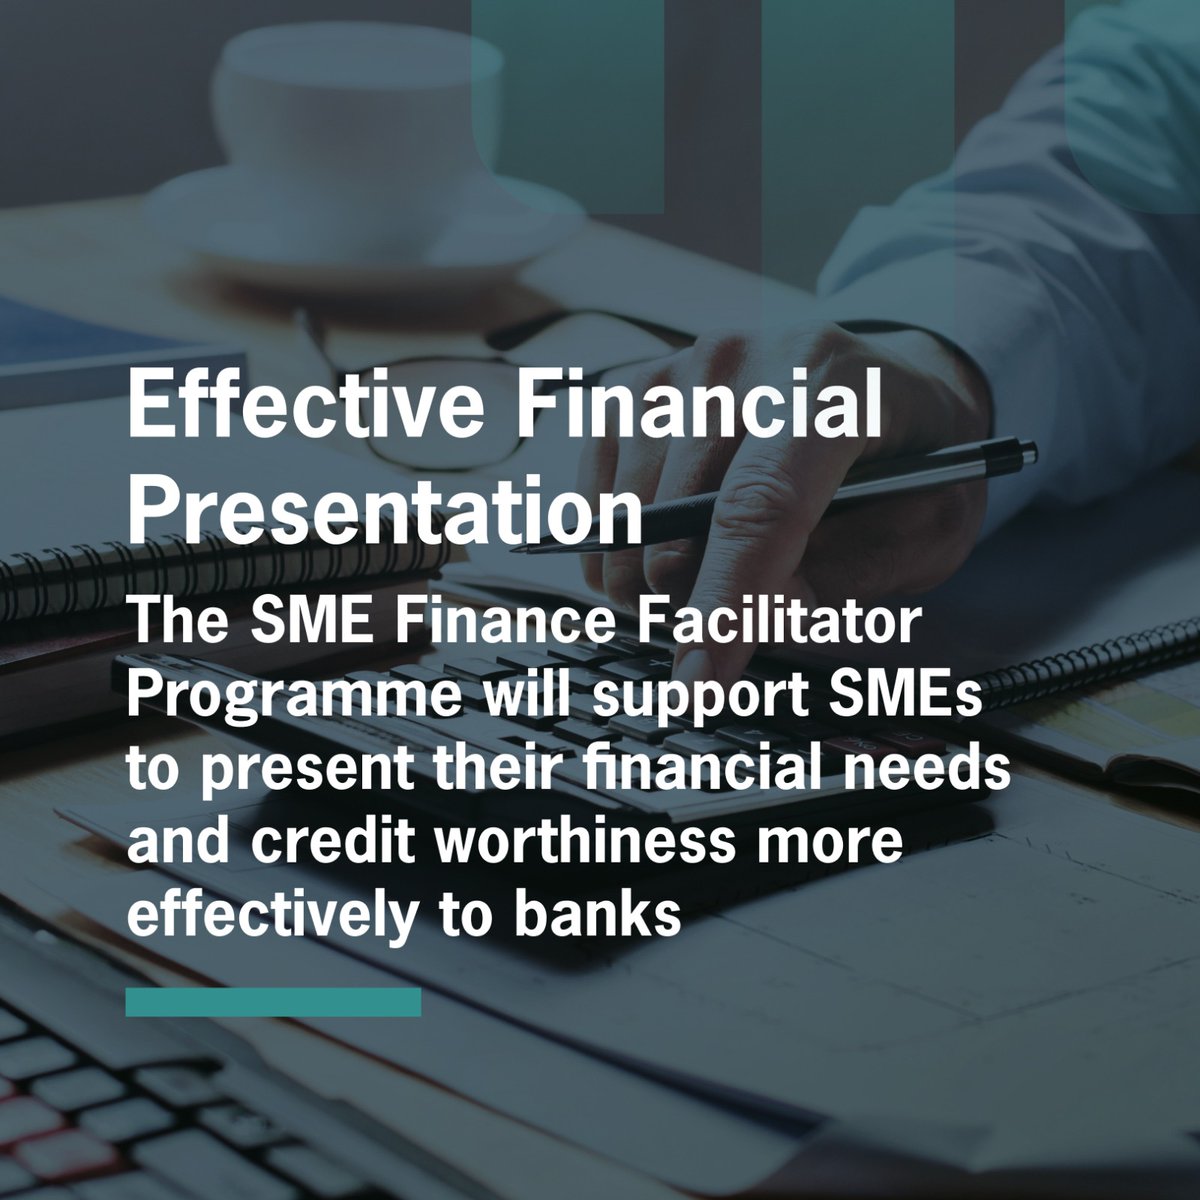 Unlock the full potential of your business with the SME Facilitator Programme in Abu Dhabi!

Reach out to us on smeff@ded.abudhabi.ae for more information.

#ADSMEHub #SMEFinance
#This_is_Abudhabi